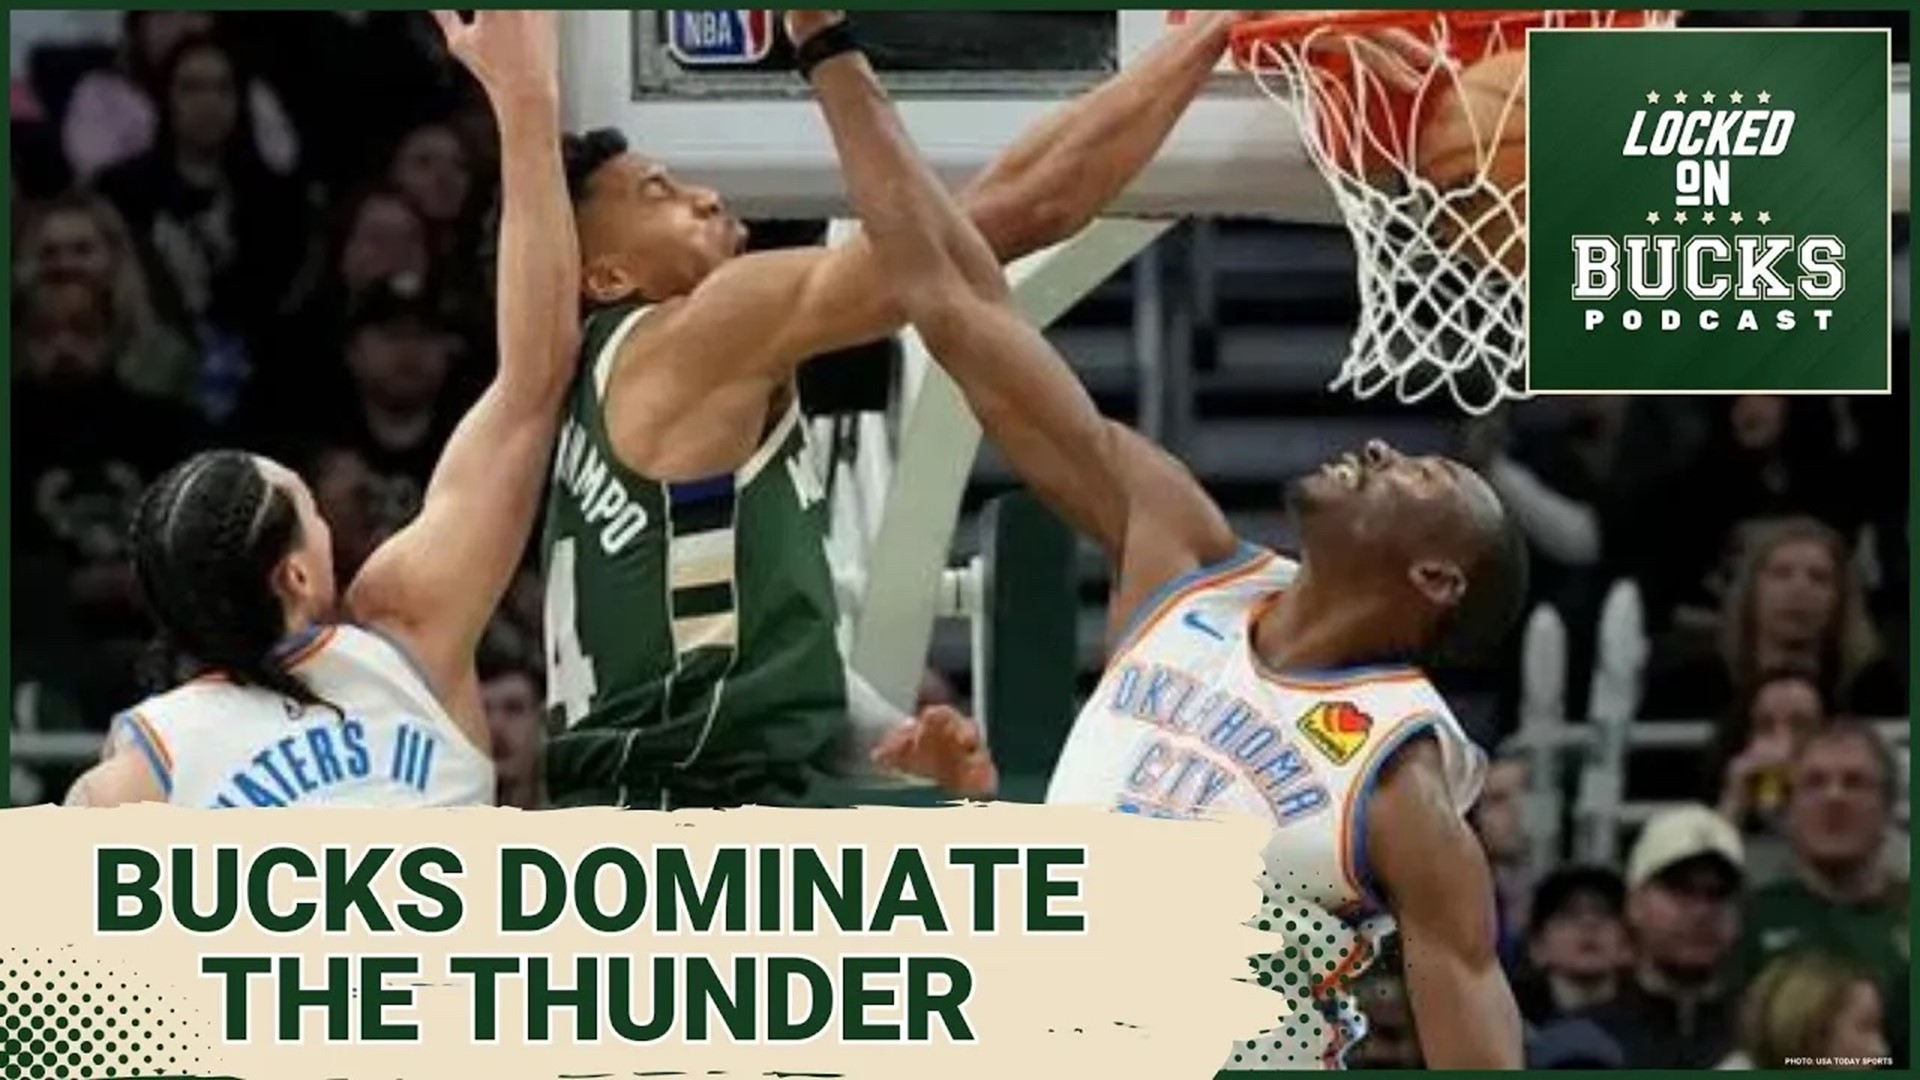 The Milwaukee Bucks put together an impressive 25 point victory over the Oklahoma City Thunder with a 118-93 win on Sunday night in Milwaukee.